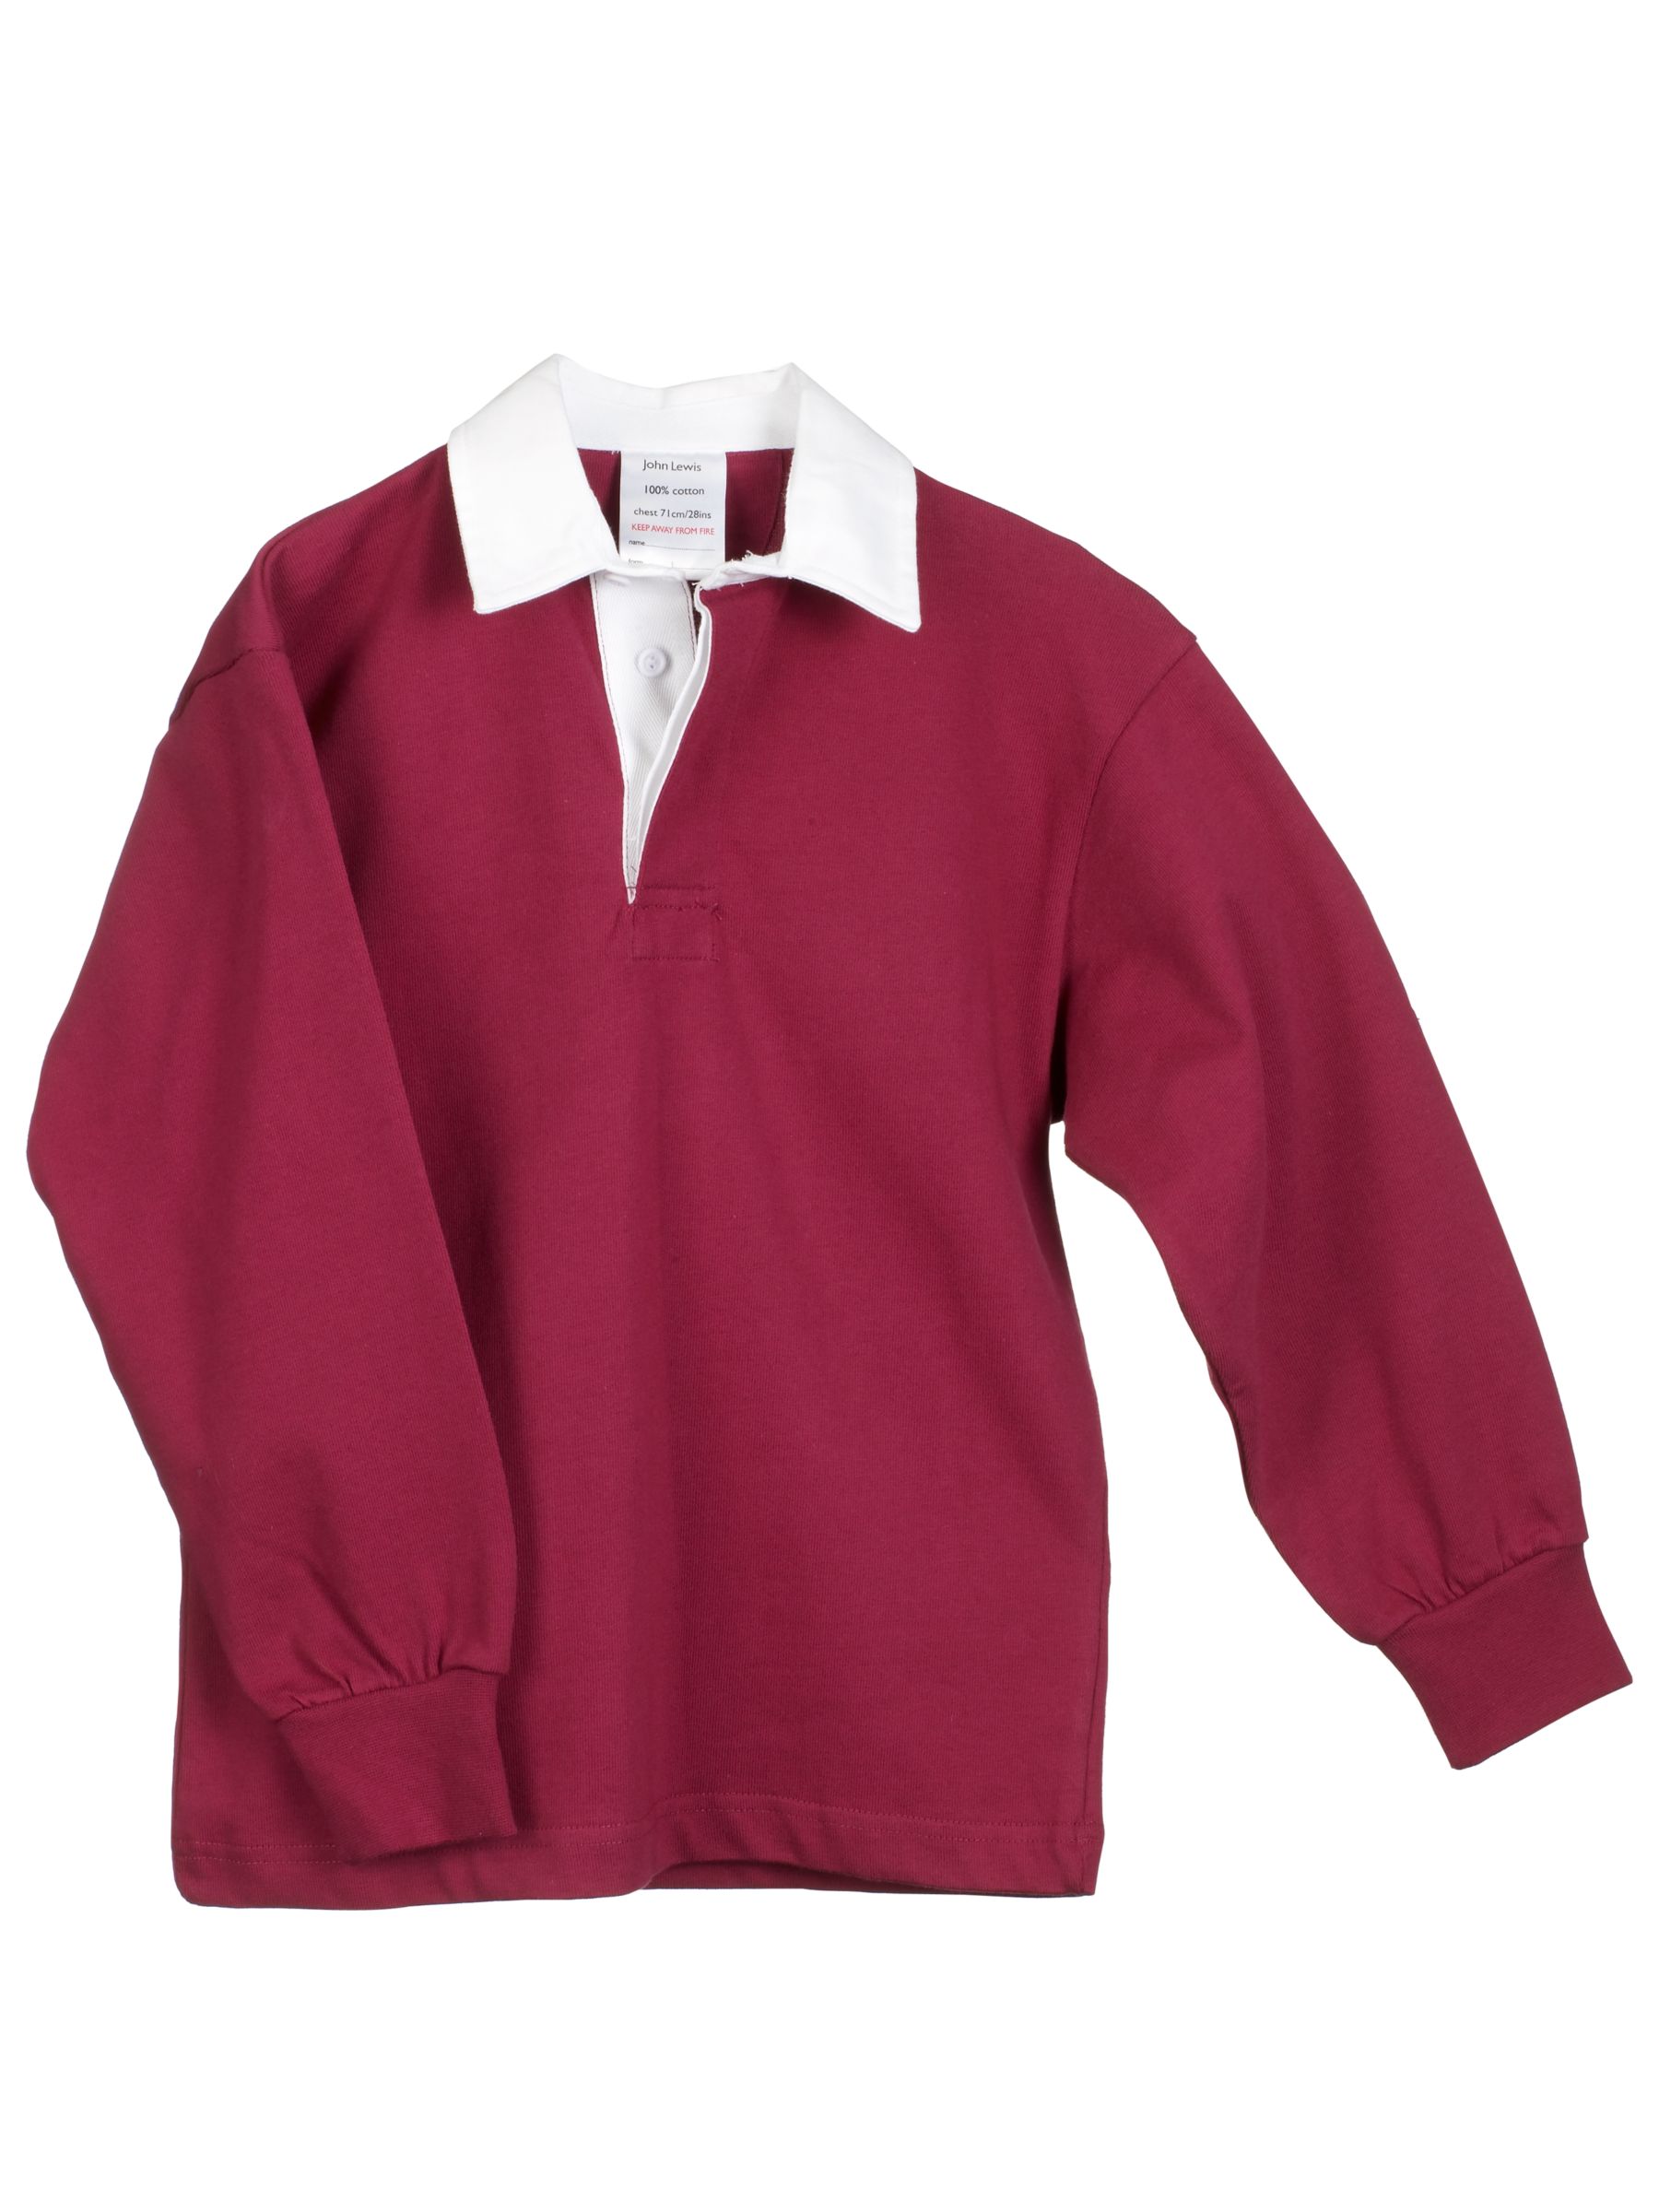 John Lewis Cotton Rugby Shirt, Maroon, Age 13-14